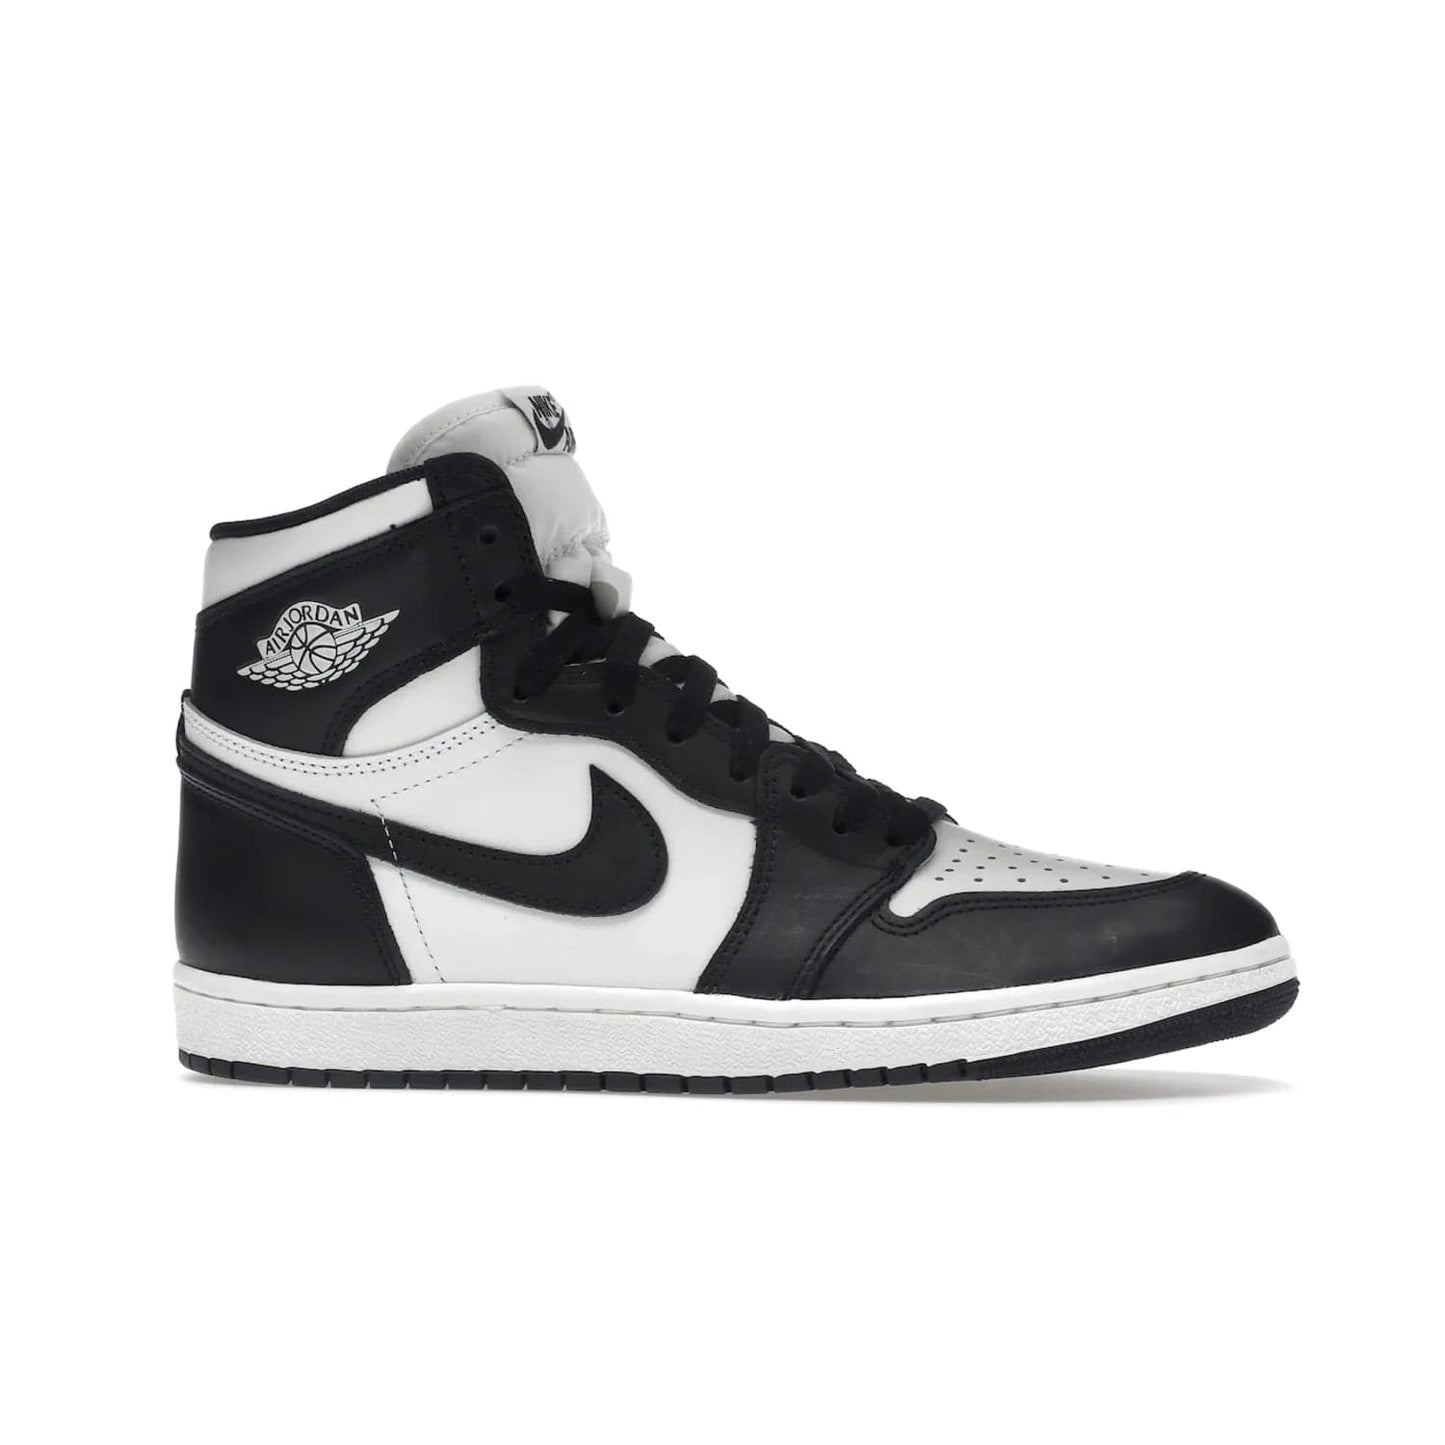 Jordan 1 Retro High 85 Black White (2023) - Image 2 - Only at www.BallersClubKickz.com - Brand new Jordan 1 Retro High 85 Black White (2023) now available. A classic color scheme of black and white leather uppers with signature Nike Air logo on the tongue. Must-have for any Air Jordan fan. Available February 15, 2023.